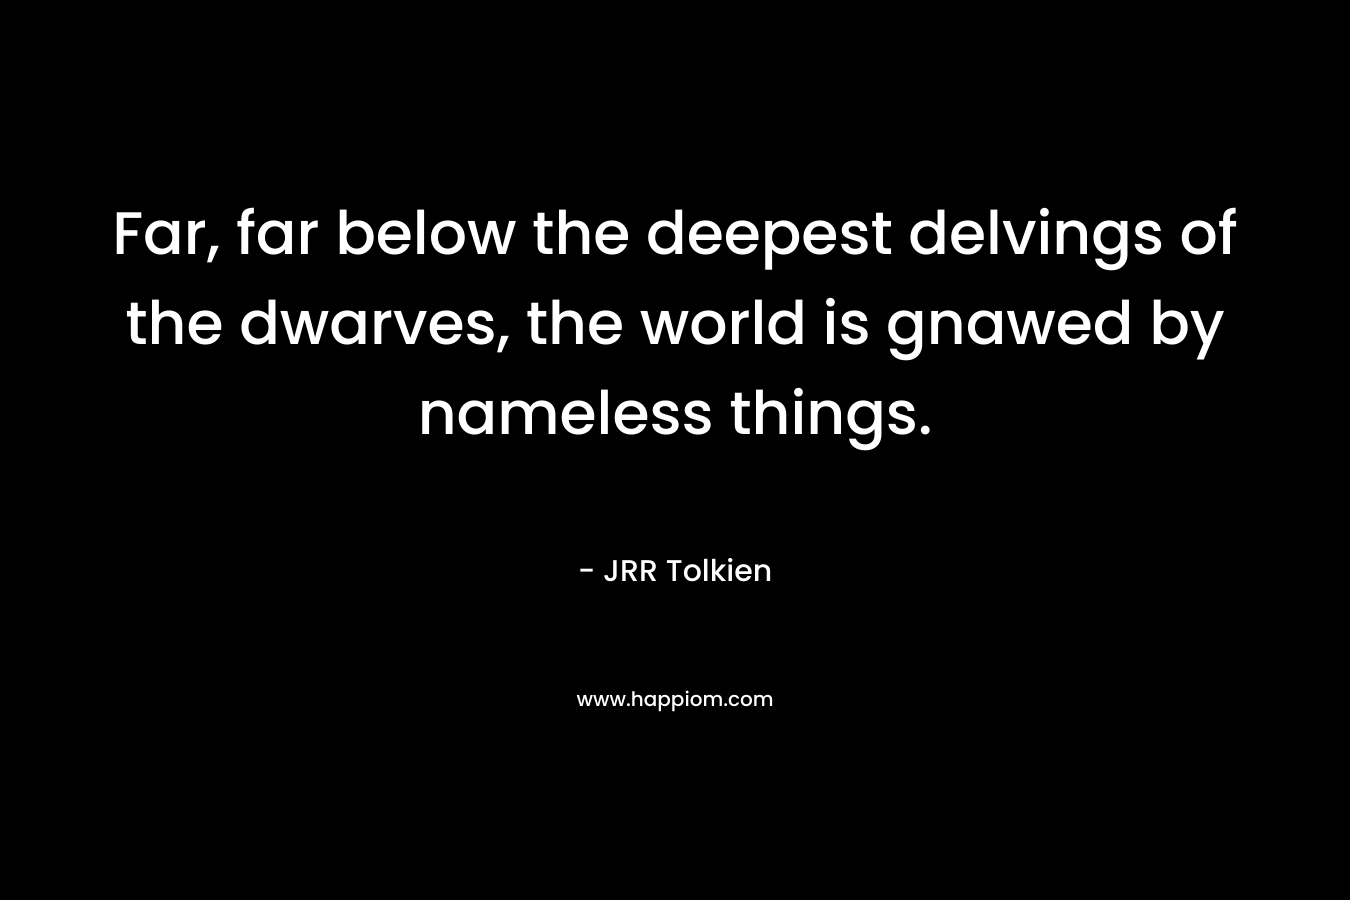 Far, far below the deepest delvings of the dwarves, the world is gnawed by nameless things. – JRR Tolkien